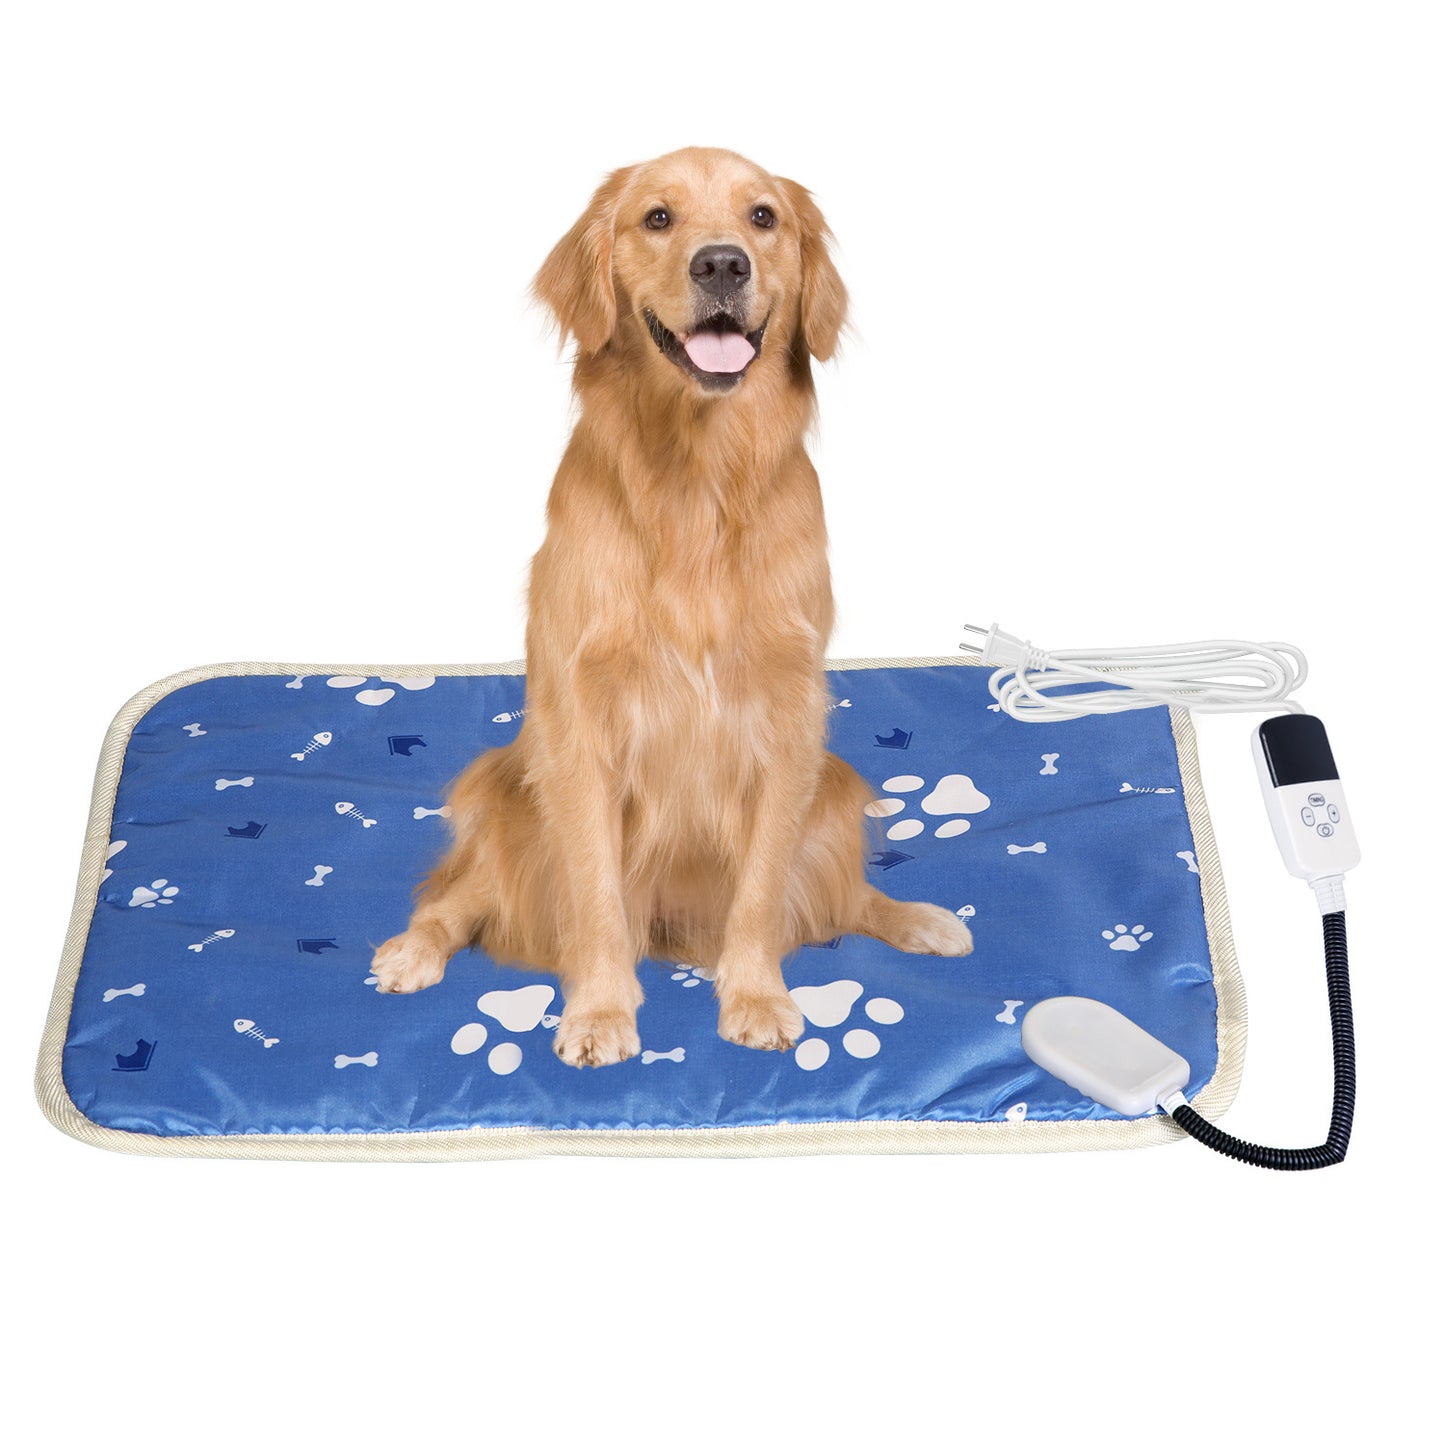 Pet Heating Pad Electric Dog Cat Heating Mat Waterproof Warming Blanket with 9 Heating Levels 4 Timer Setting Constan On Function Chewing-resistant